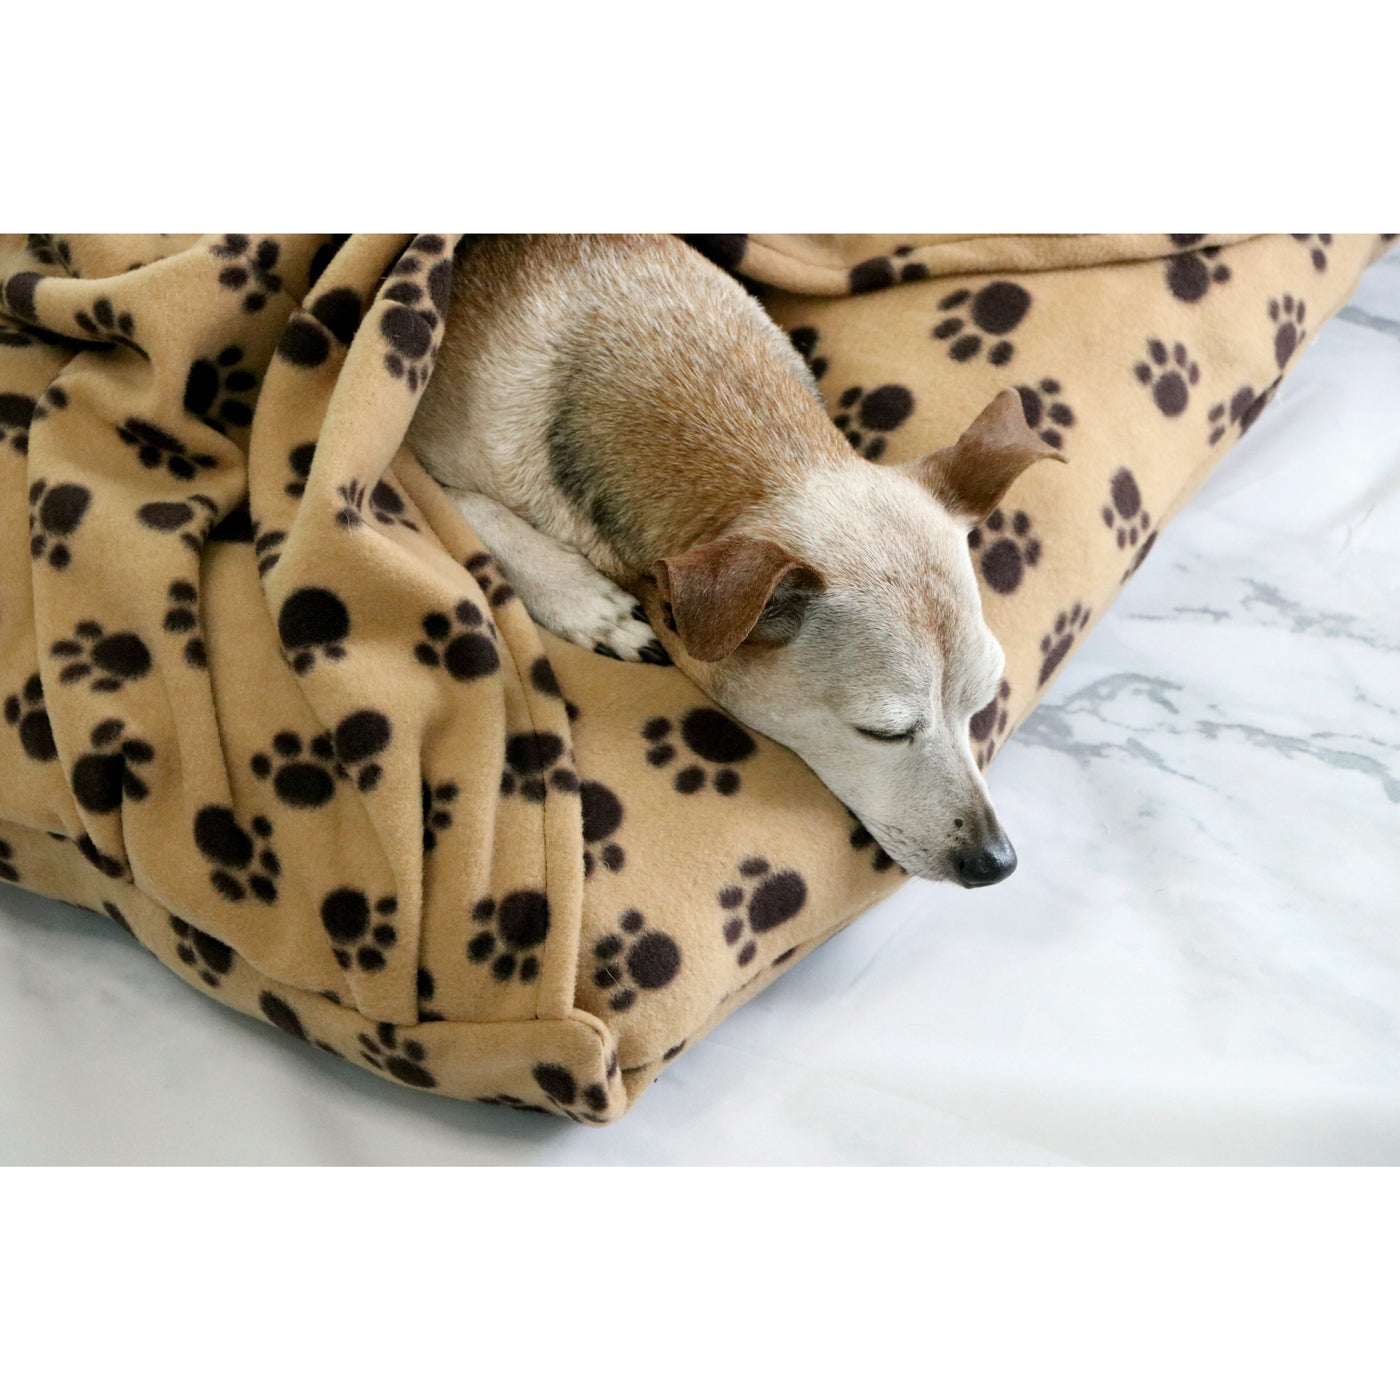 Puppy Pillow Paper Pattern